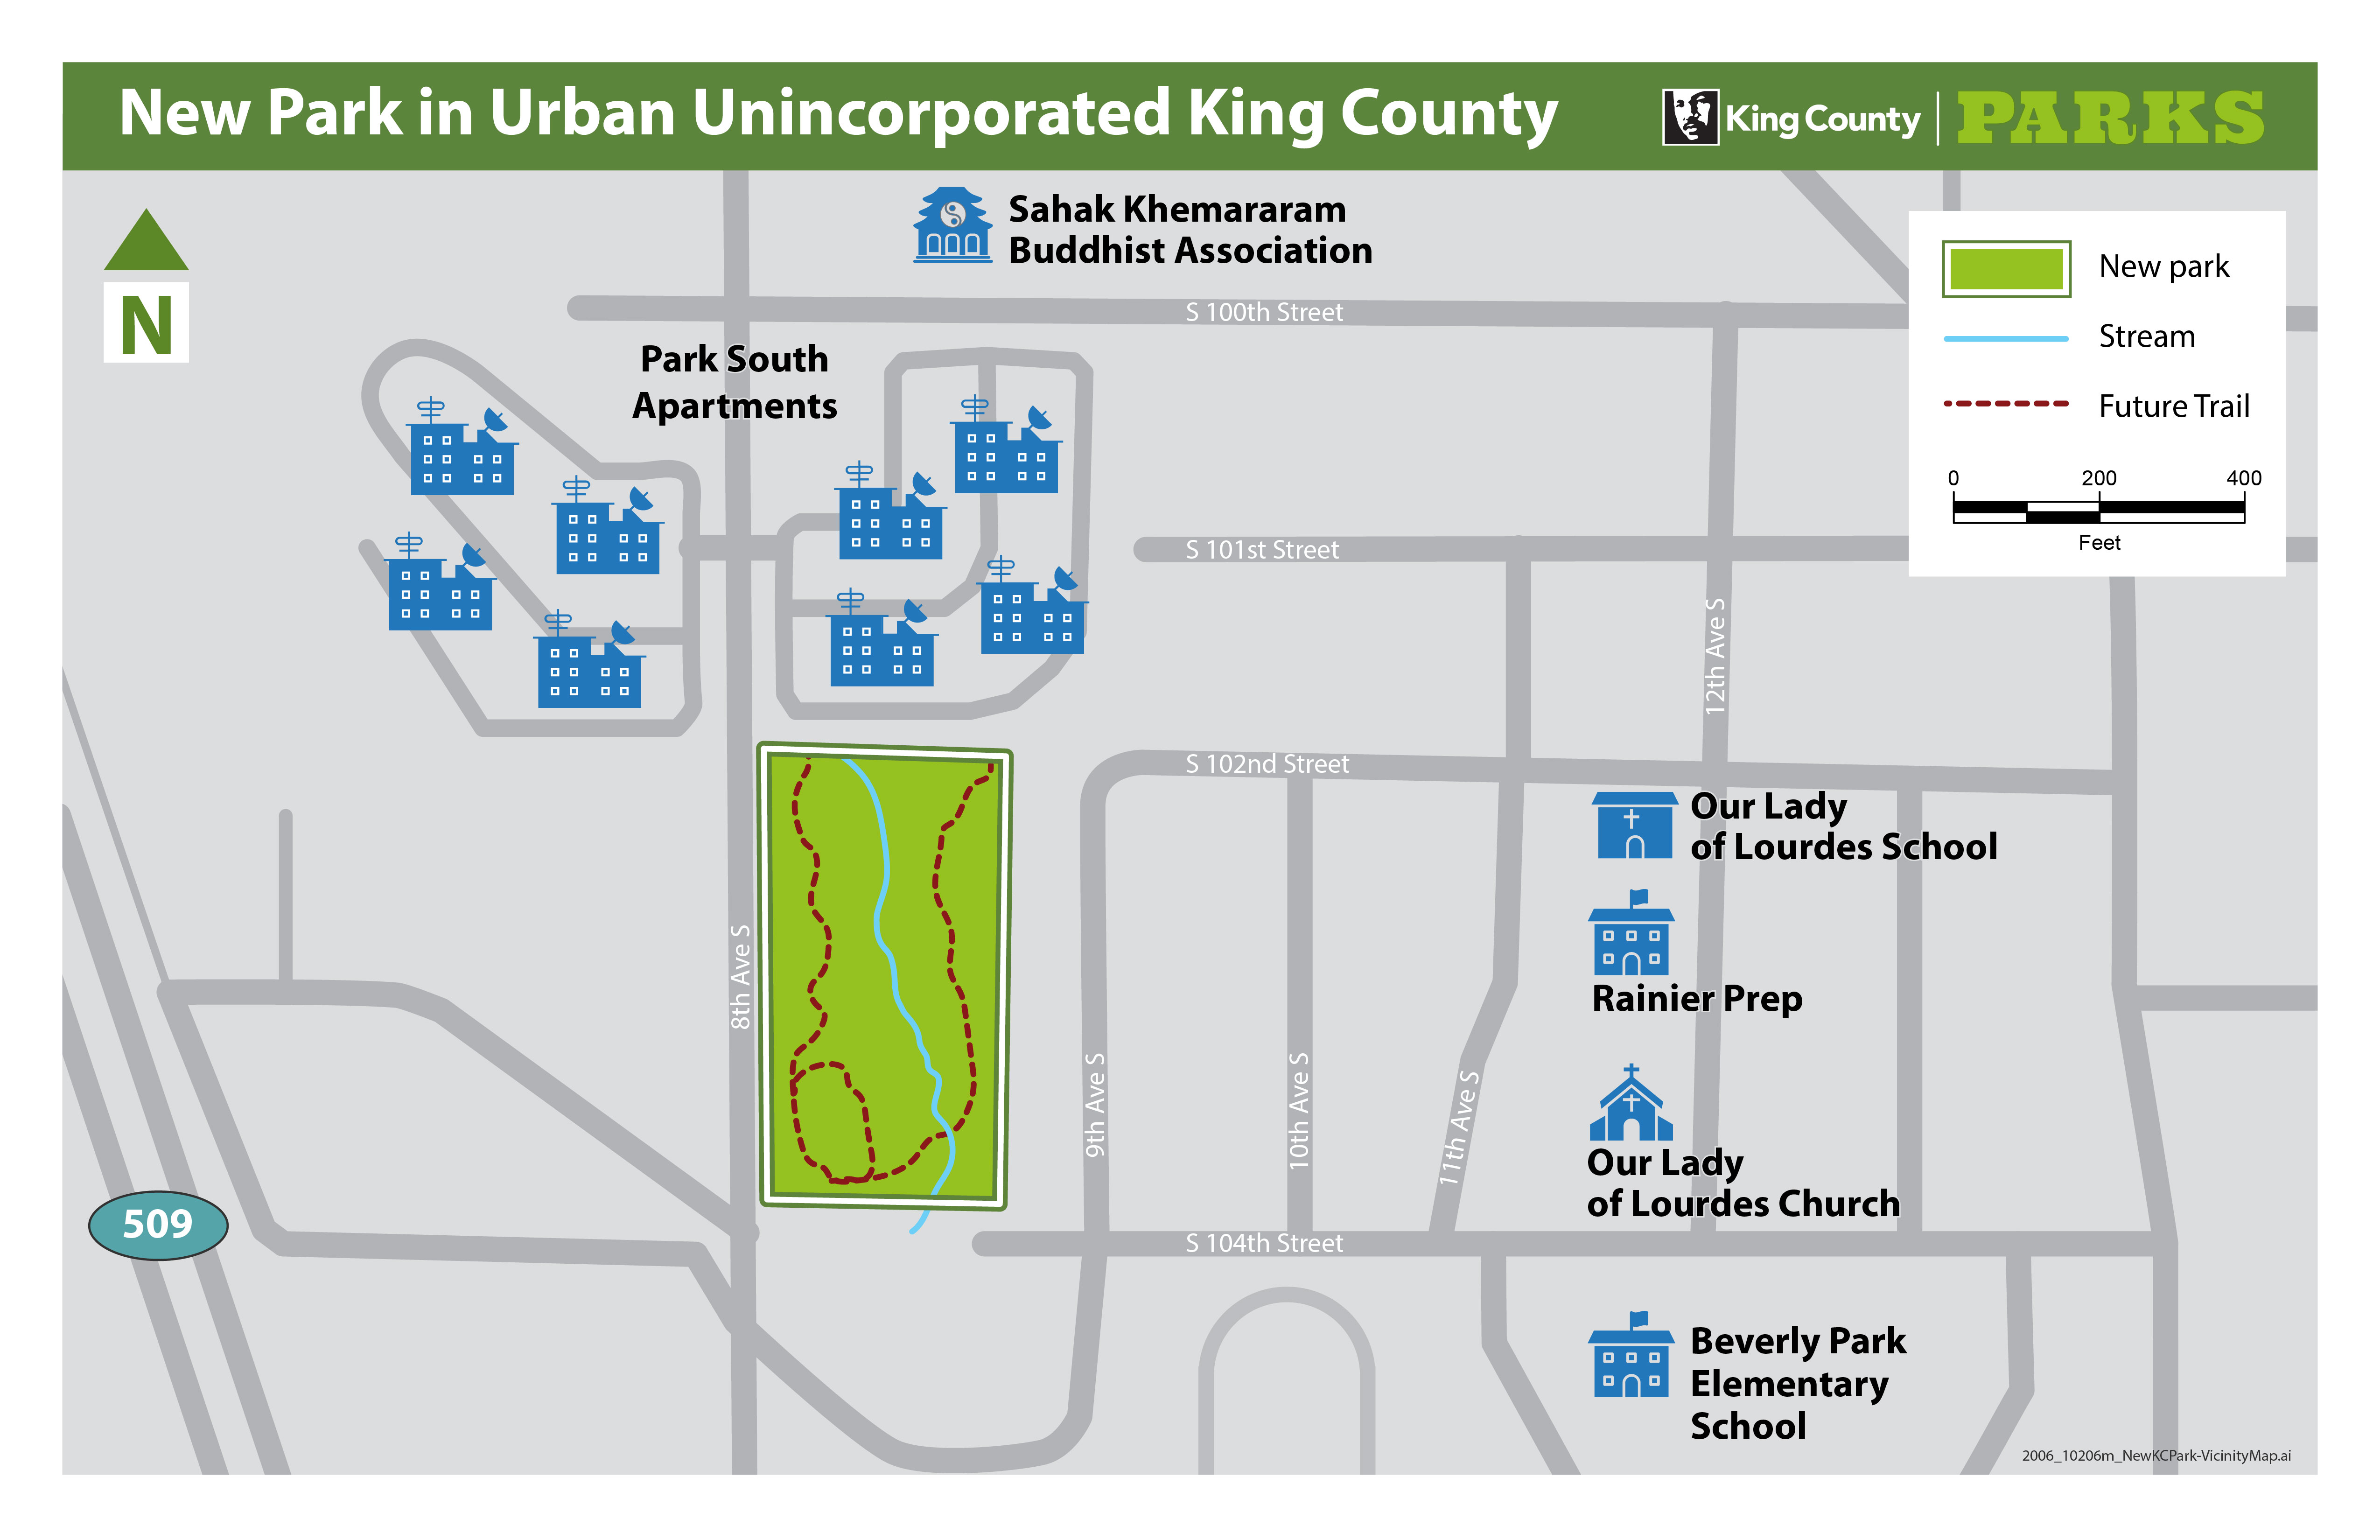 A map showing a new park in unincorporated King County.